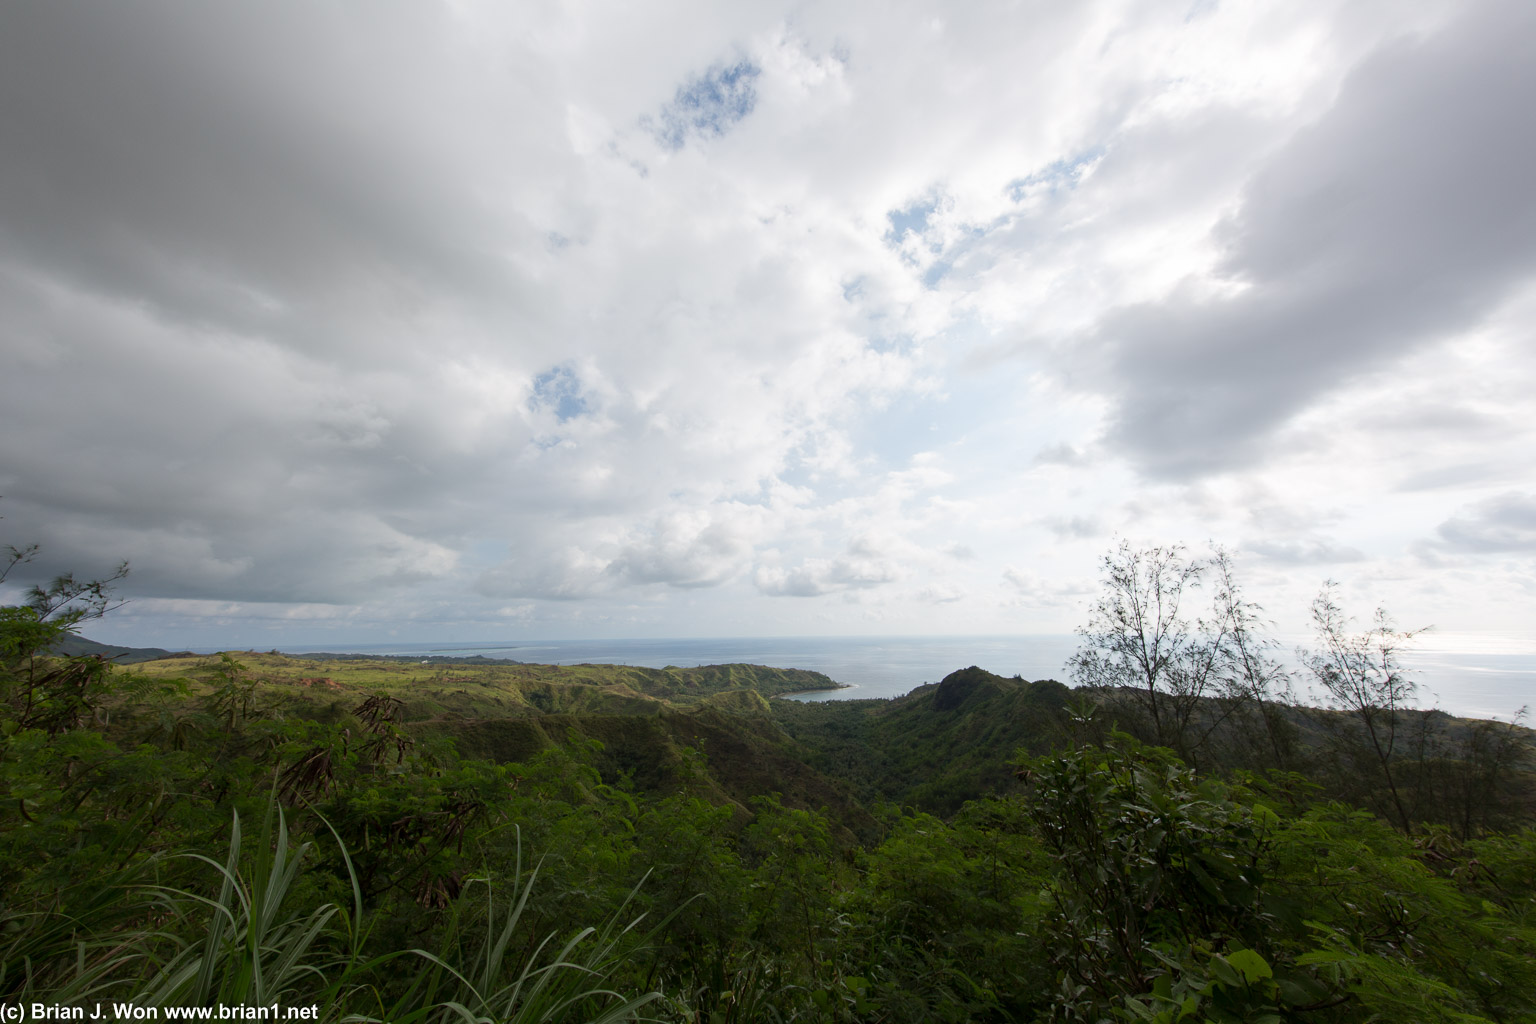 Cetti Bay from Cetti Bay overlook.